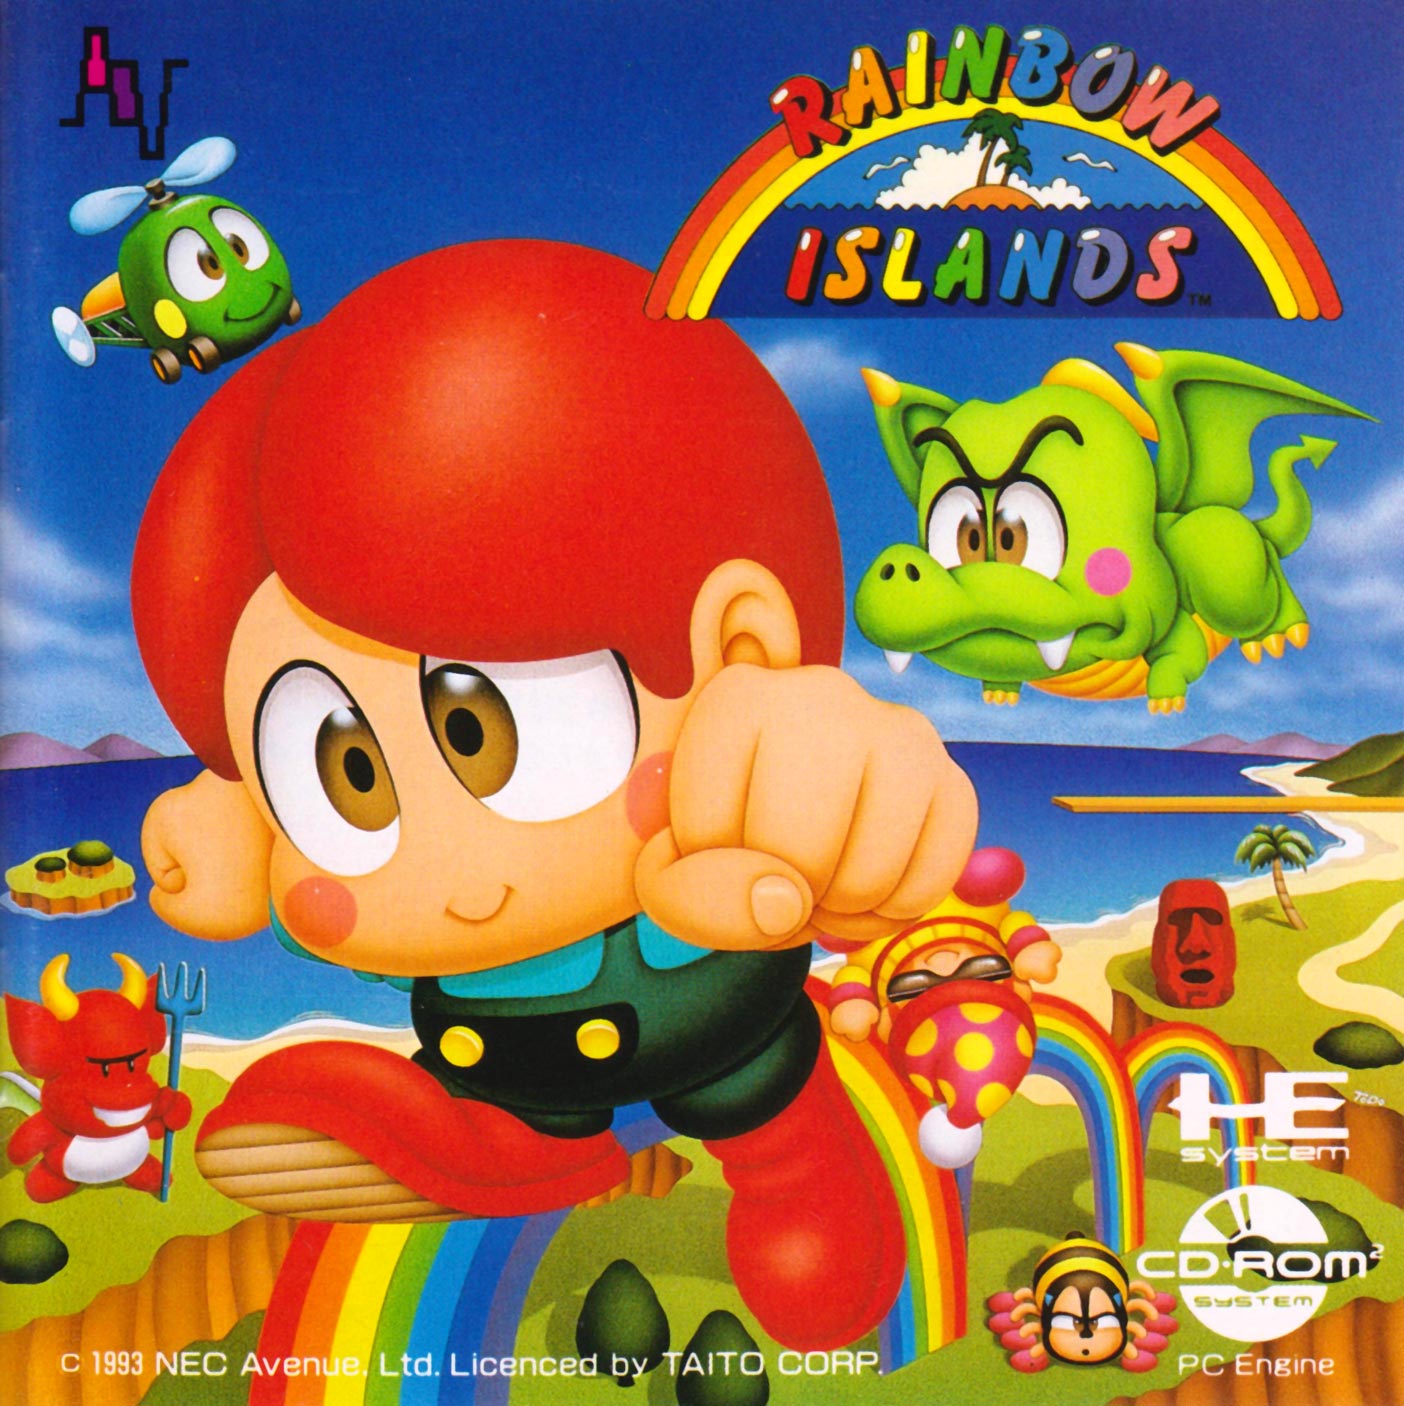 Rainbow Islands - The PC Engine Software Bible